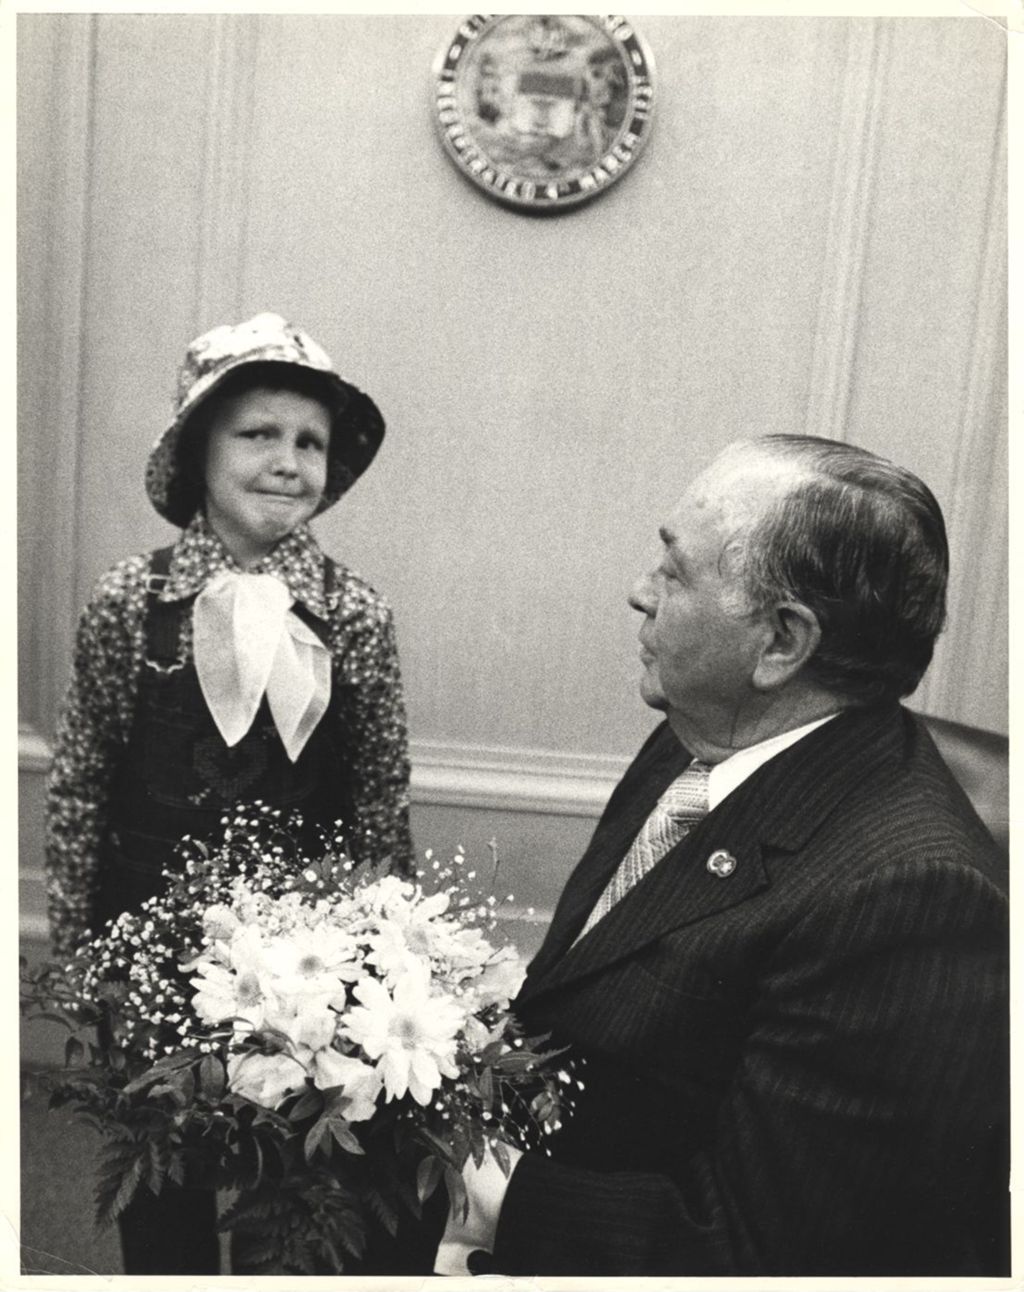 Miniature of American Cancer Society representative with Richard J. Daley